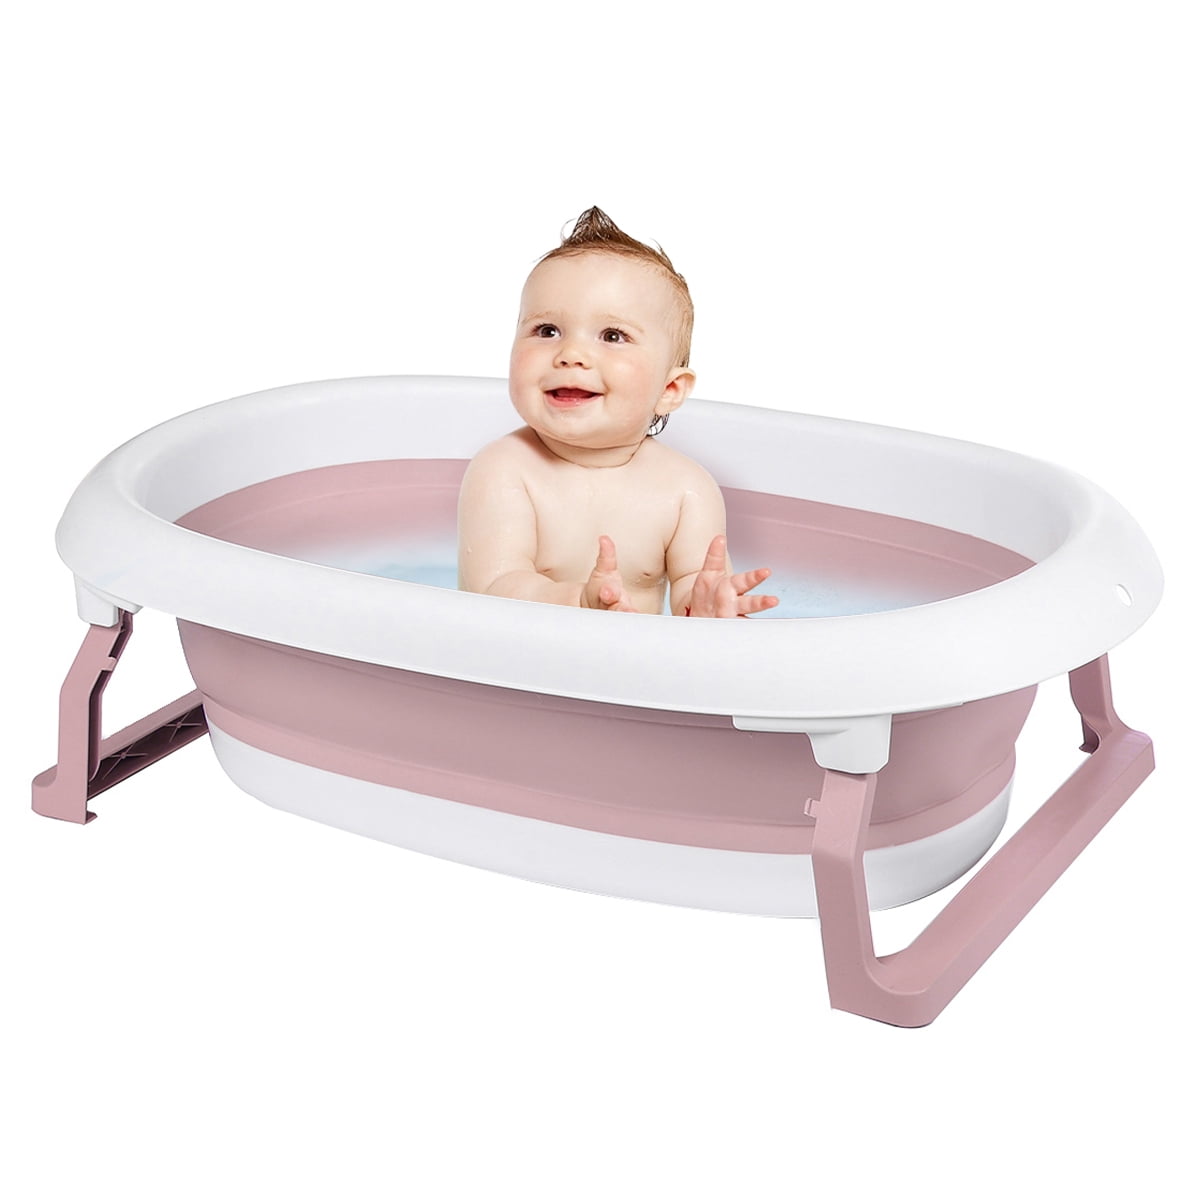 Munchkin Sit and Soak Baby Bath Tub with Built-in Support Bump and Padded Foam 